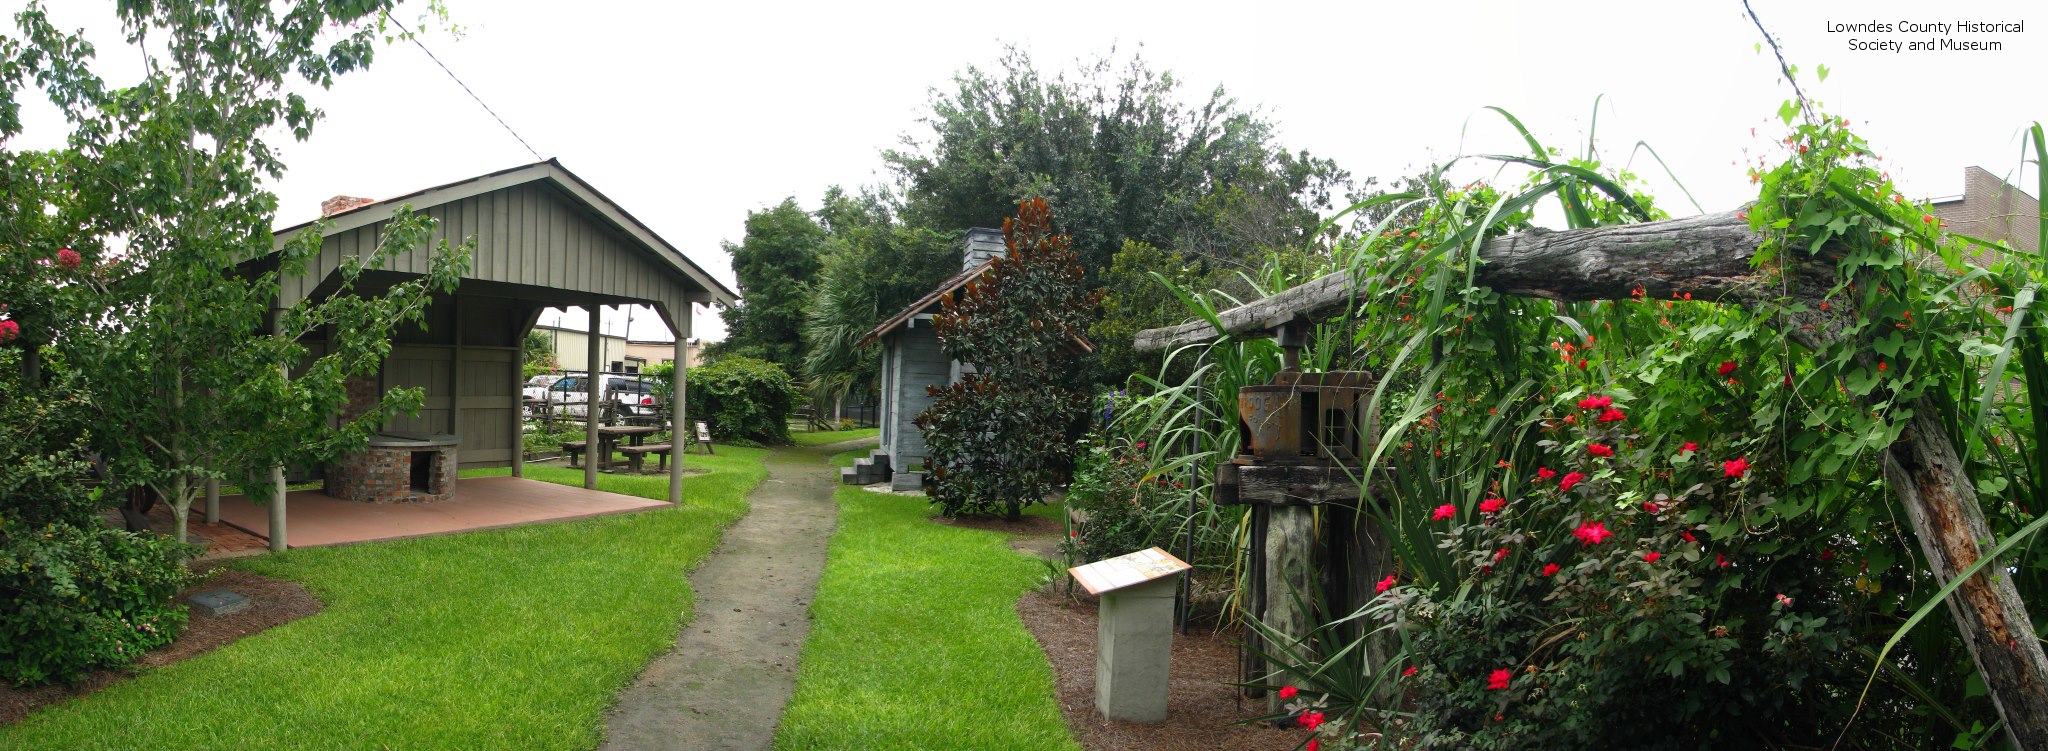 Lowndes County Historical Museum backyard